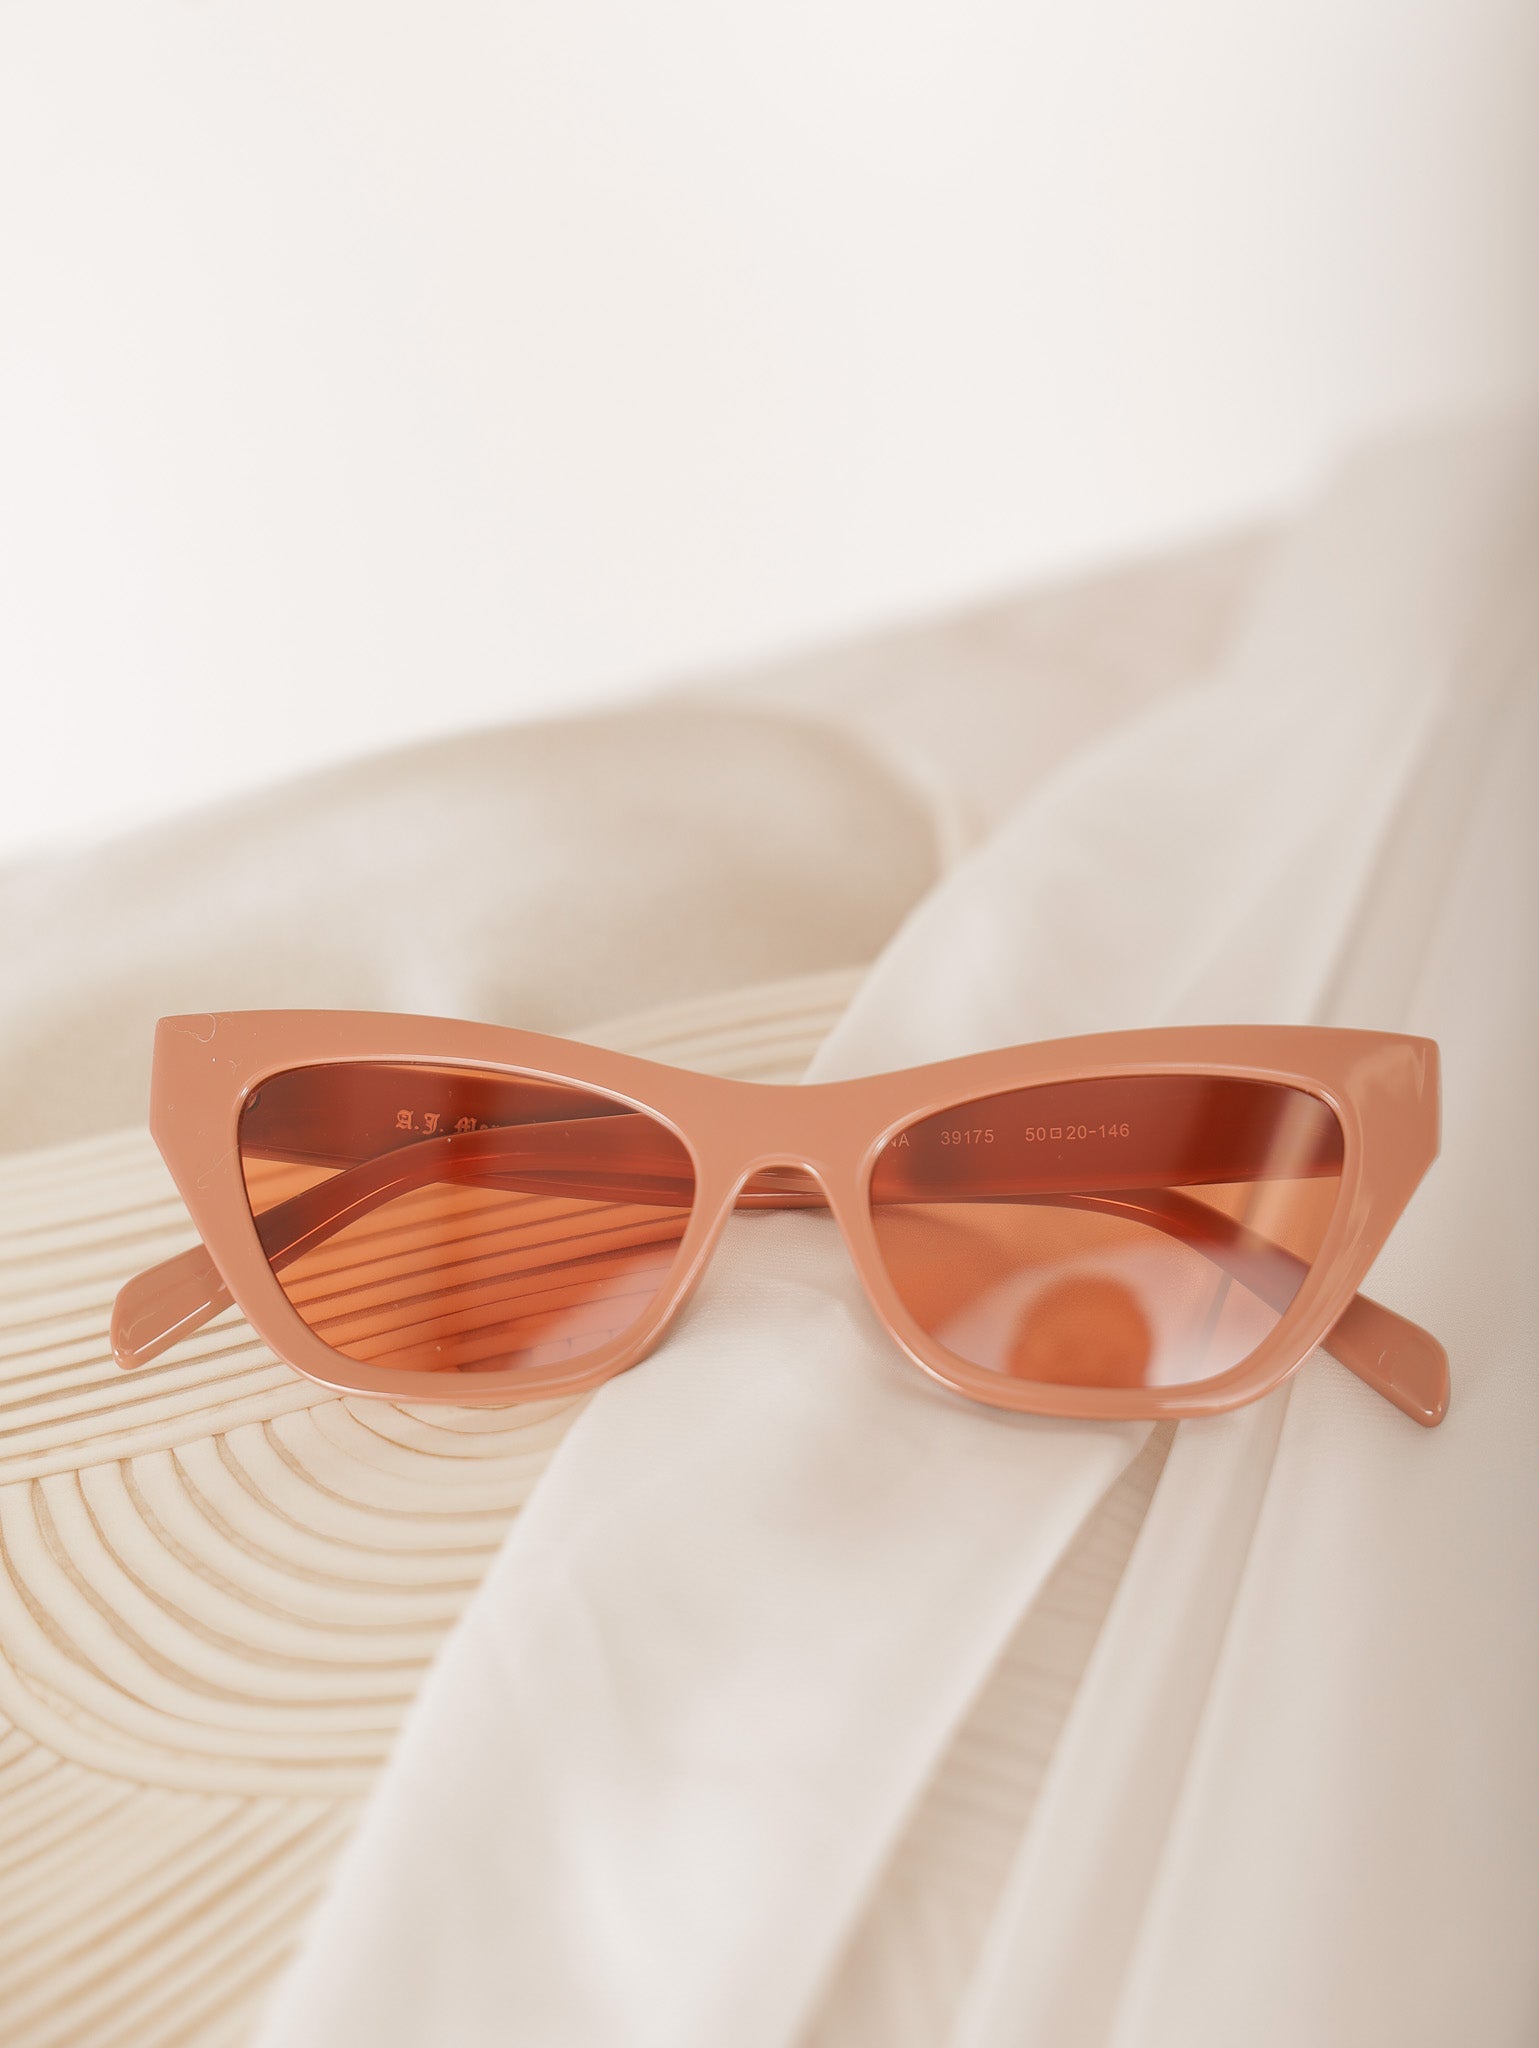 Molly Green - Take It Easy Sunnies - Accessories